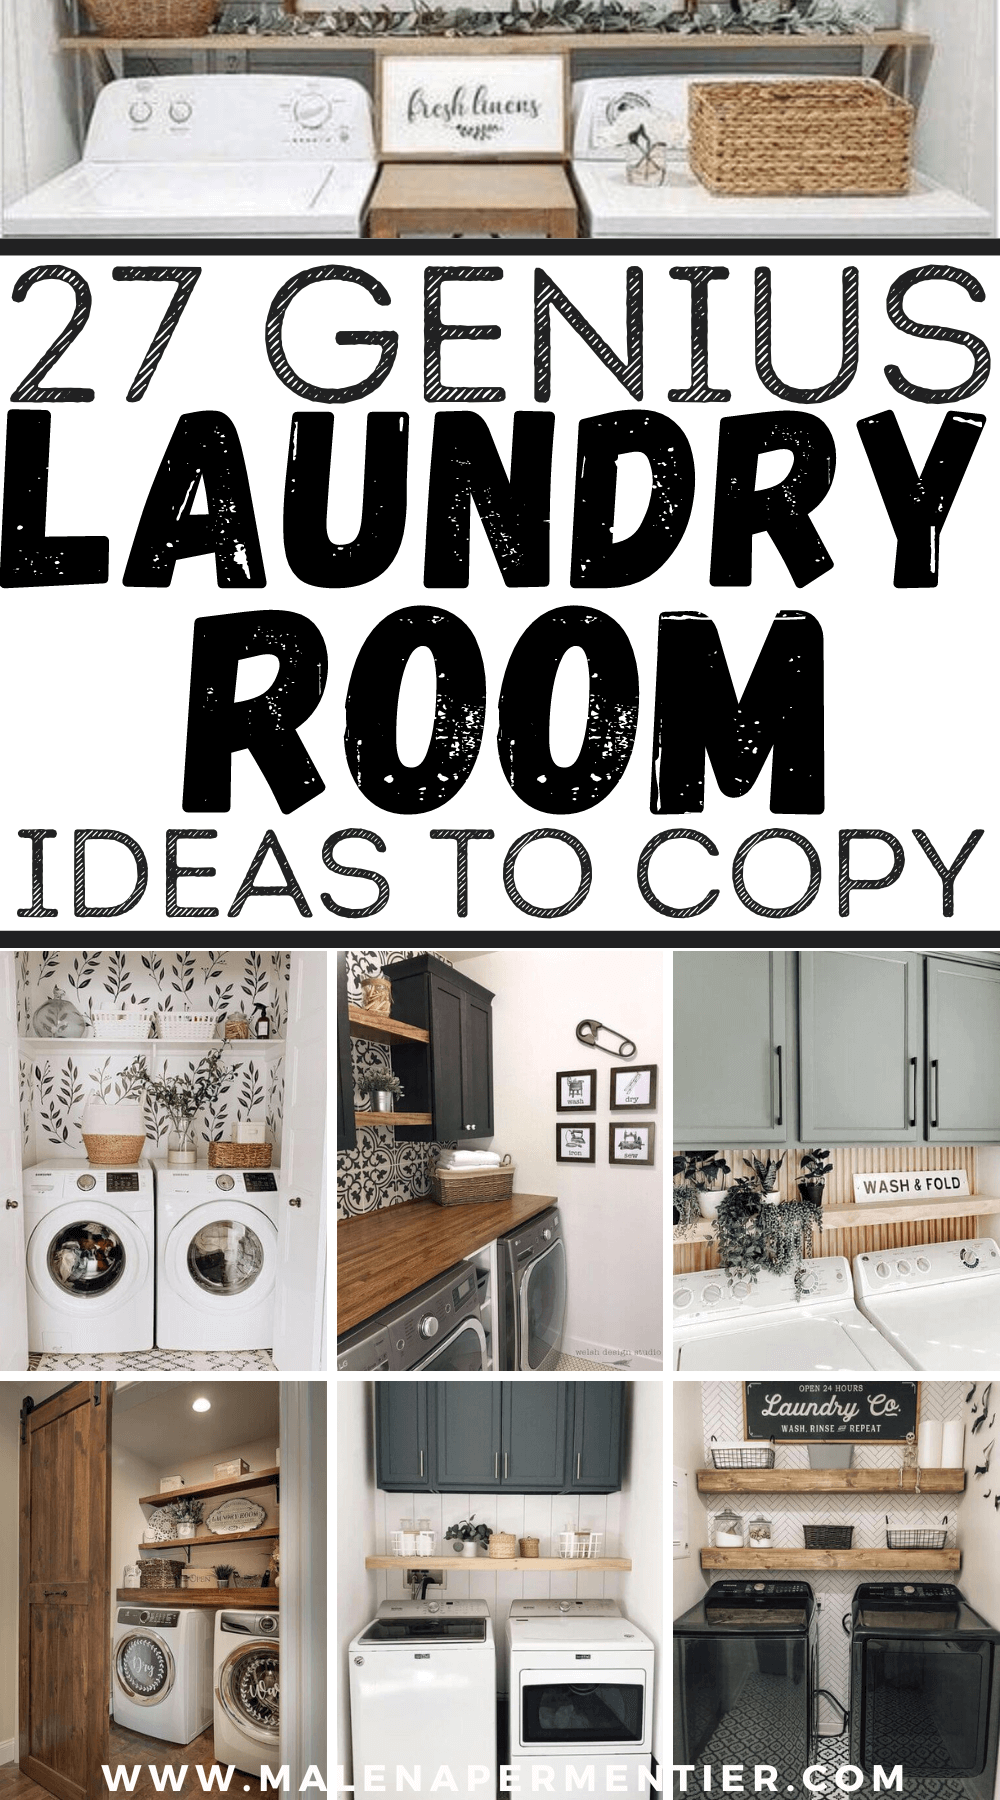 27 Laundry Room Ideas That Look Amazing (And Are Insanely Organized)